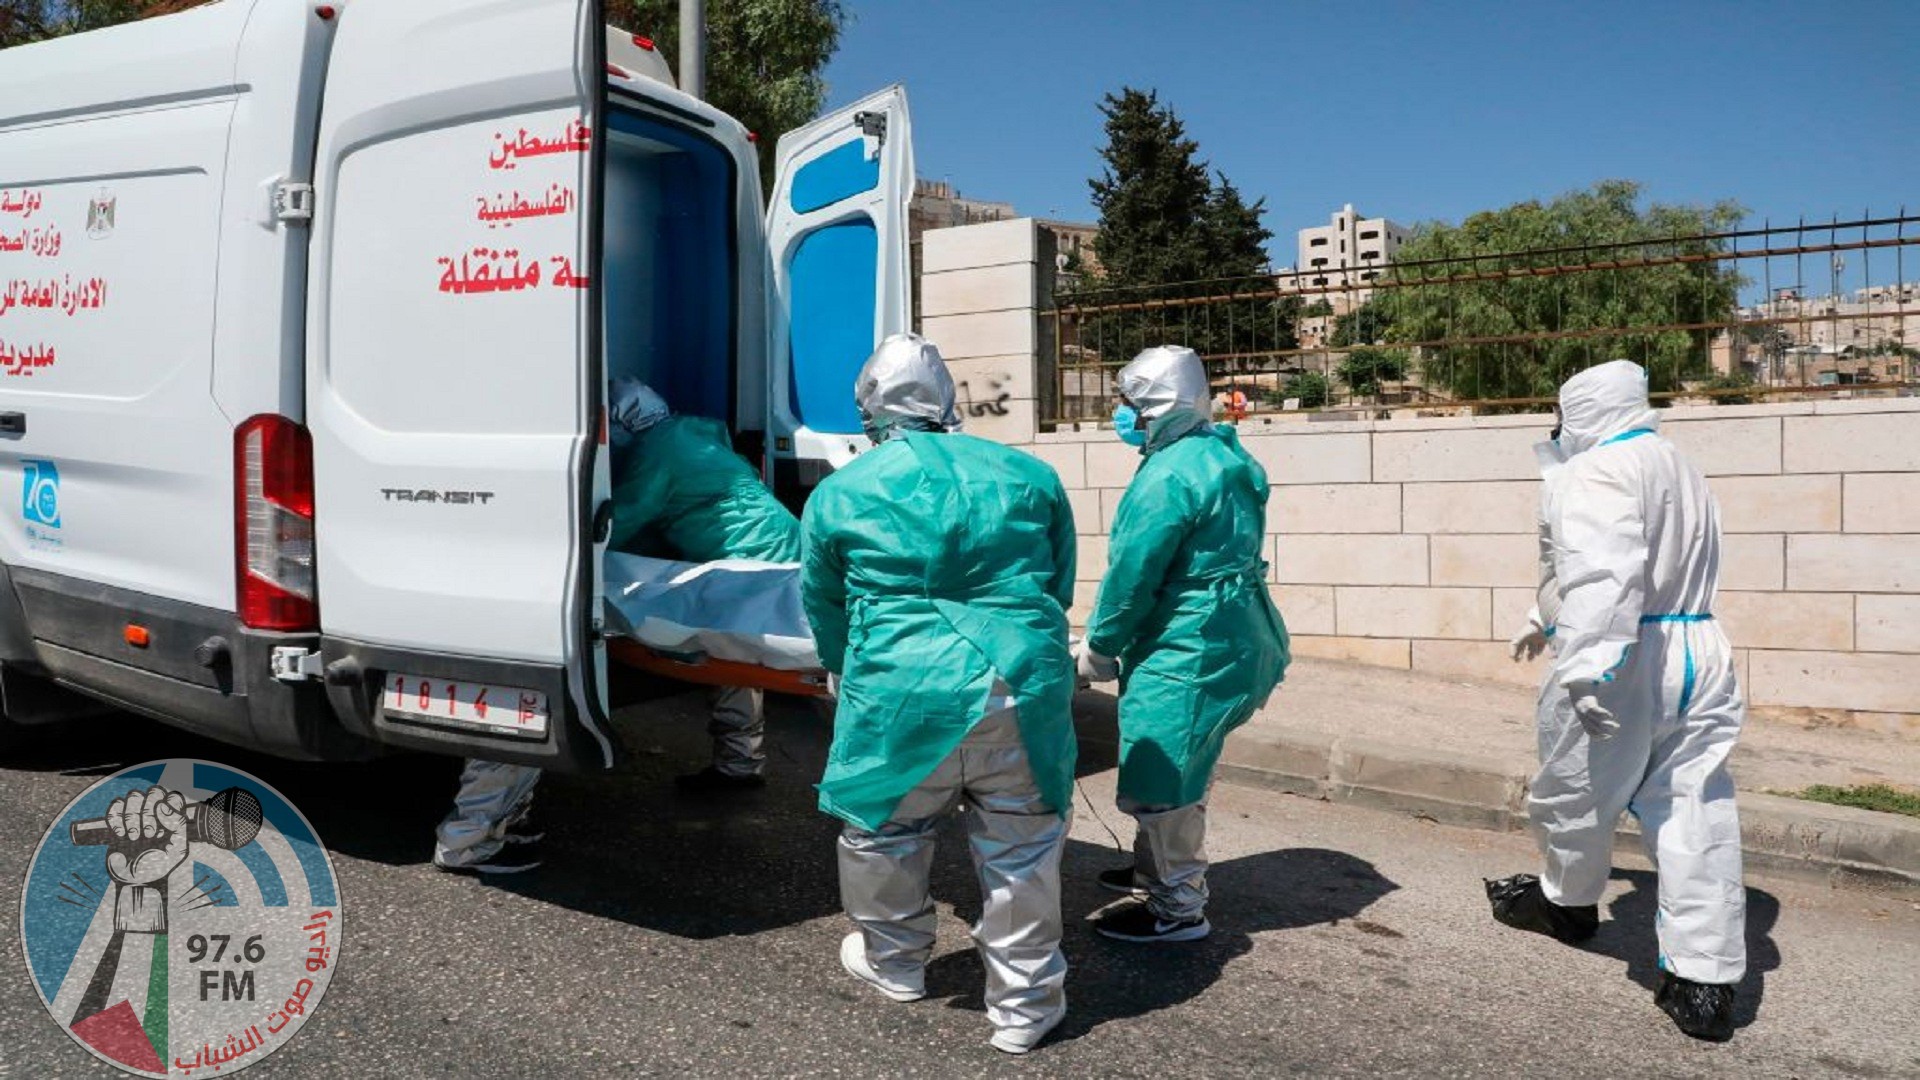 Staff of the Palestinian Ministry of Health in full hazmat suits transport the body of 47-year-old Palestinian COVID-19 victim Nassra Abu Hussein for burial in the West Bank city of Hebron, on June 29, 2020. (Photo by HAZEM BADER / AFP) (Photo by HAZEM BADER/AFP via Getty Images)